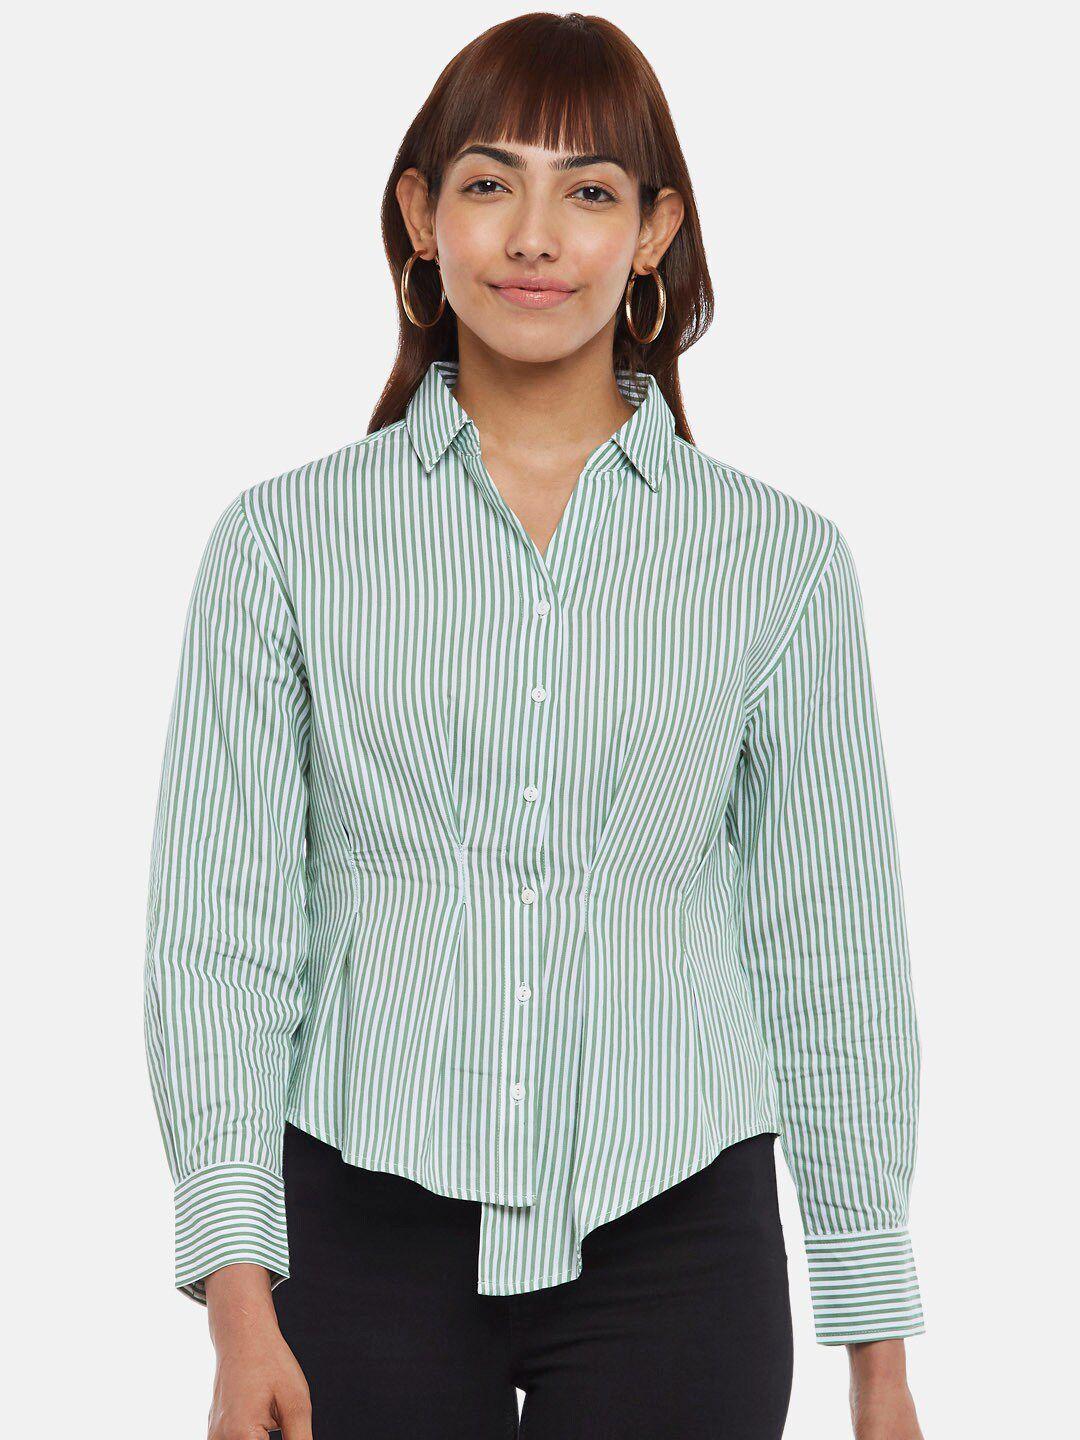 sf-jeans-by-pantaloons-women-green-striped-casual-shirt